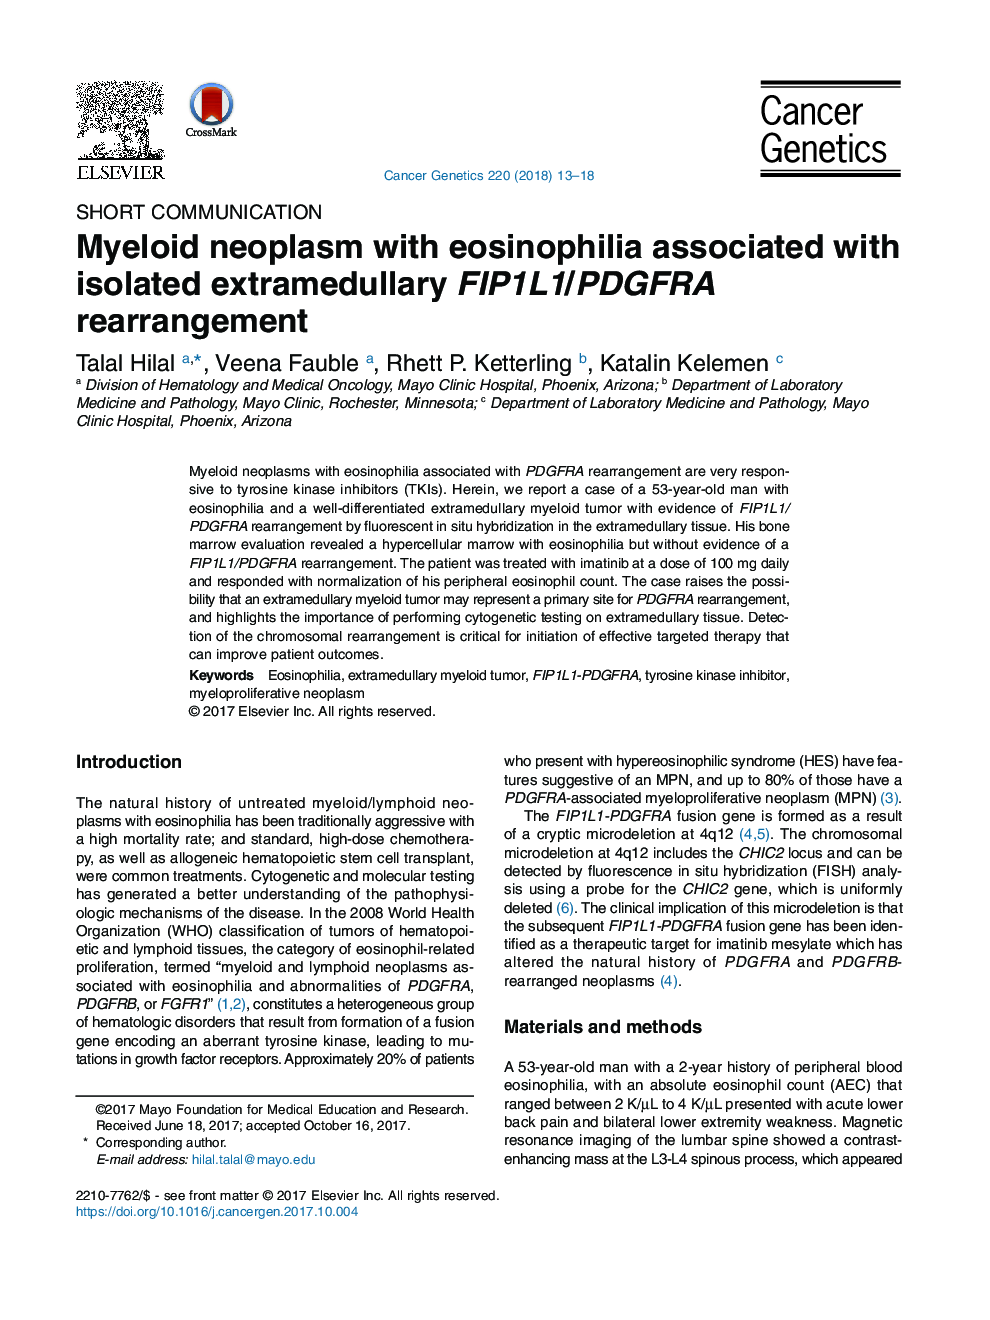 Myeloid neoplasm with eosinophilia associated with isolated extramedullary FIP1L1/PDGFRA rearrangement